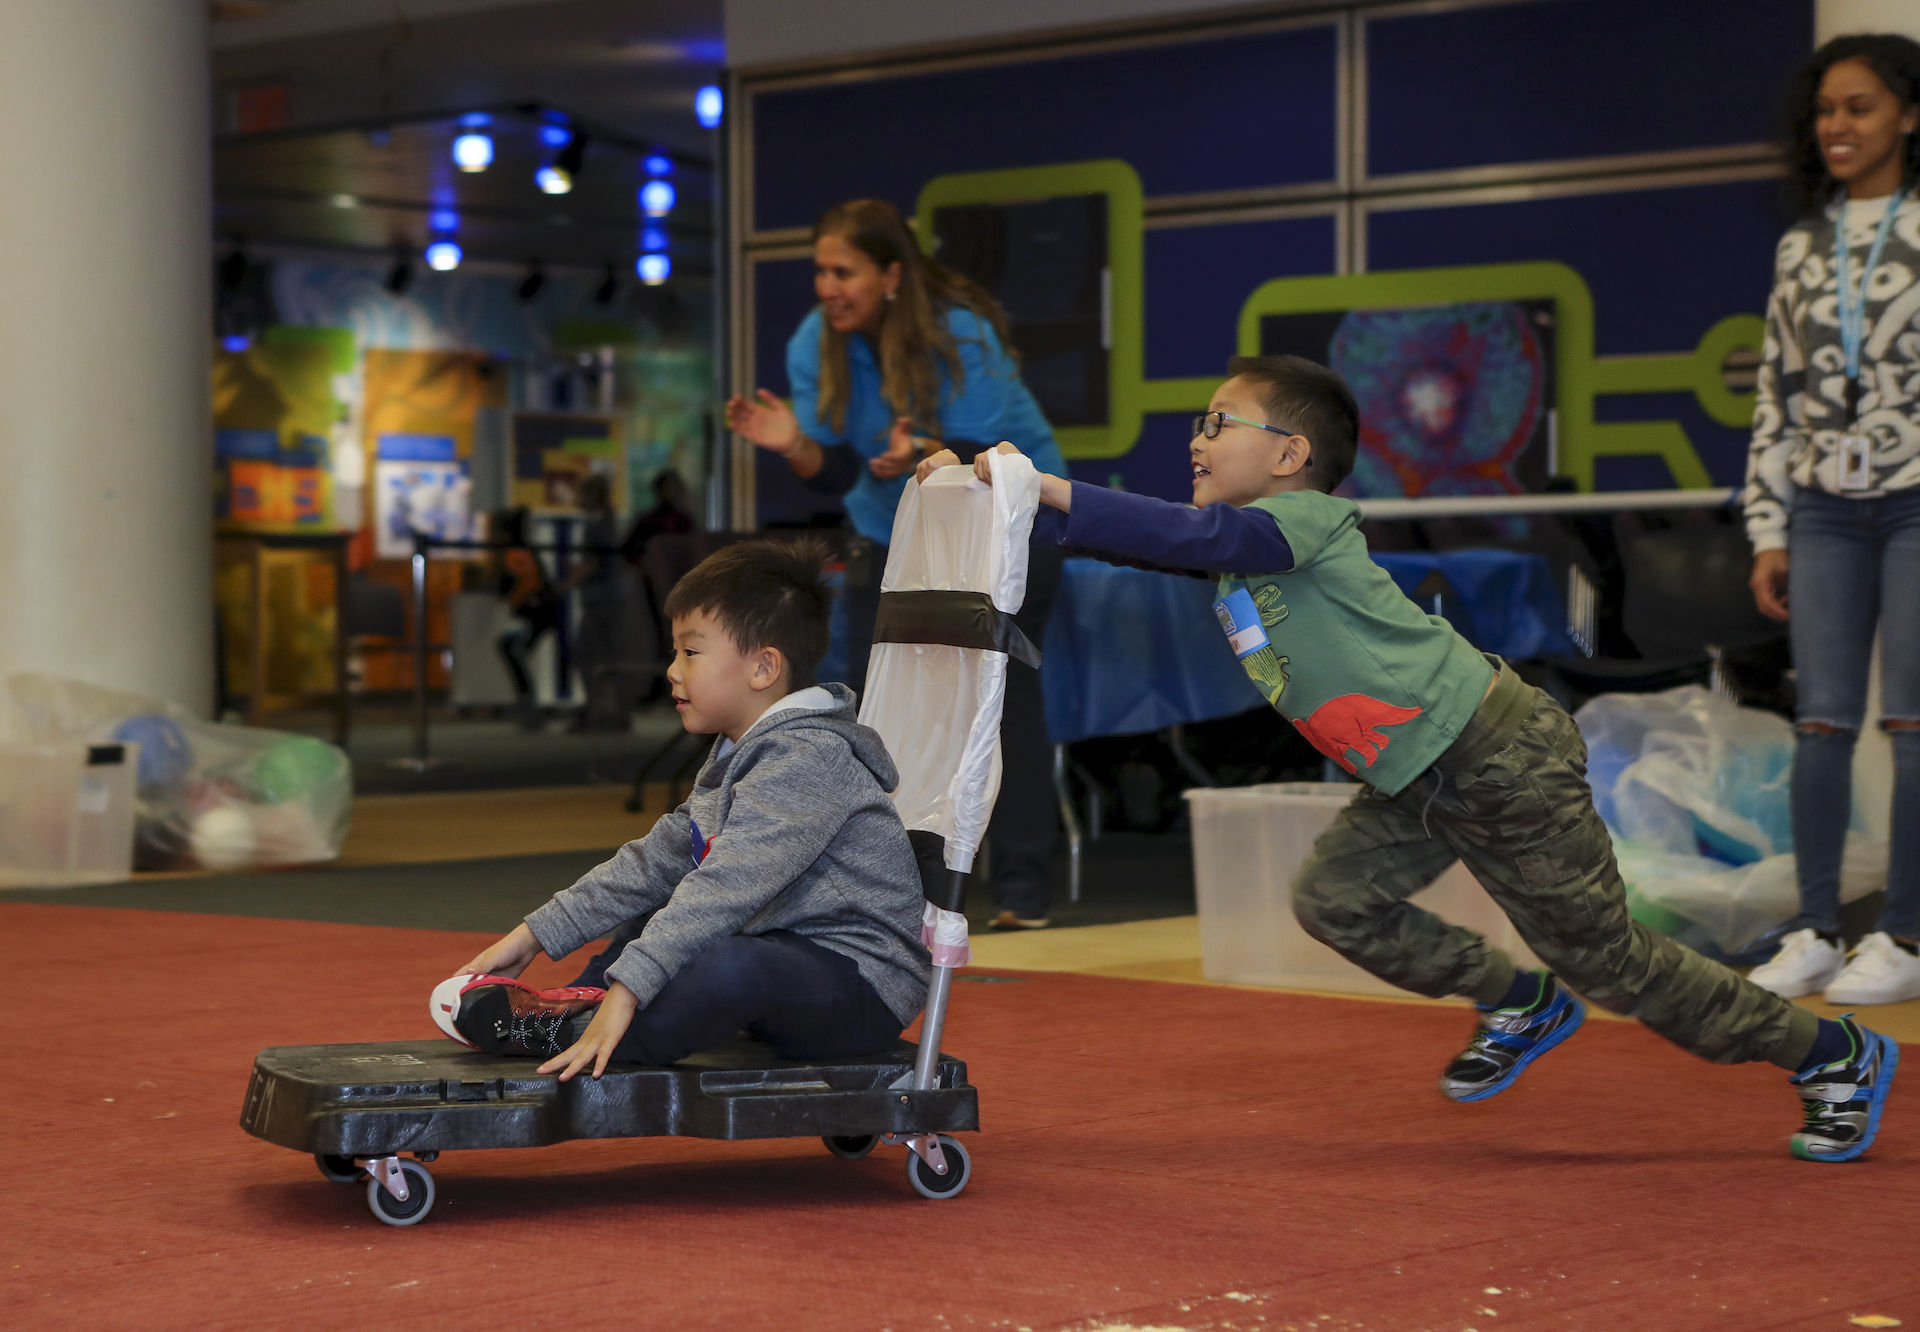 Kids playing a game where one of them is pushed on a cart